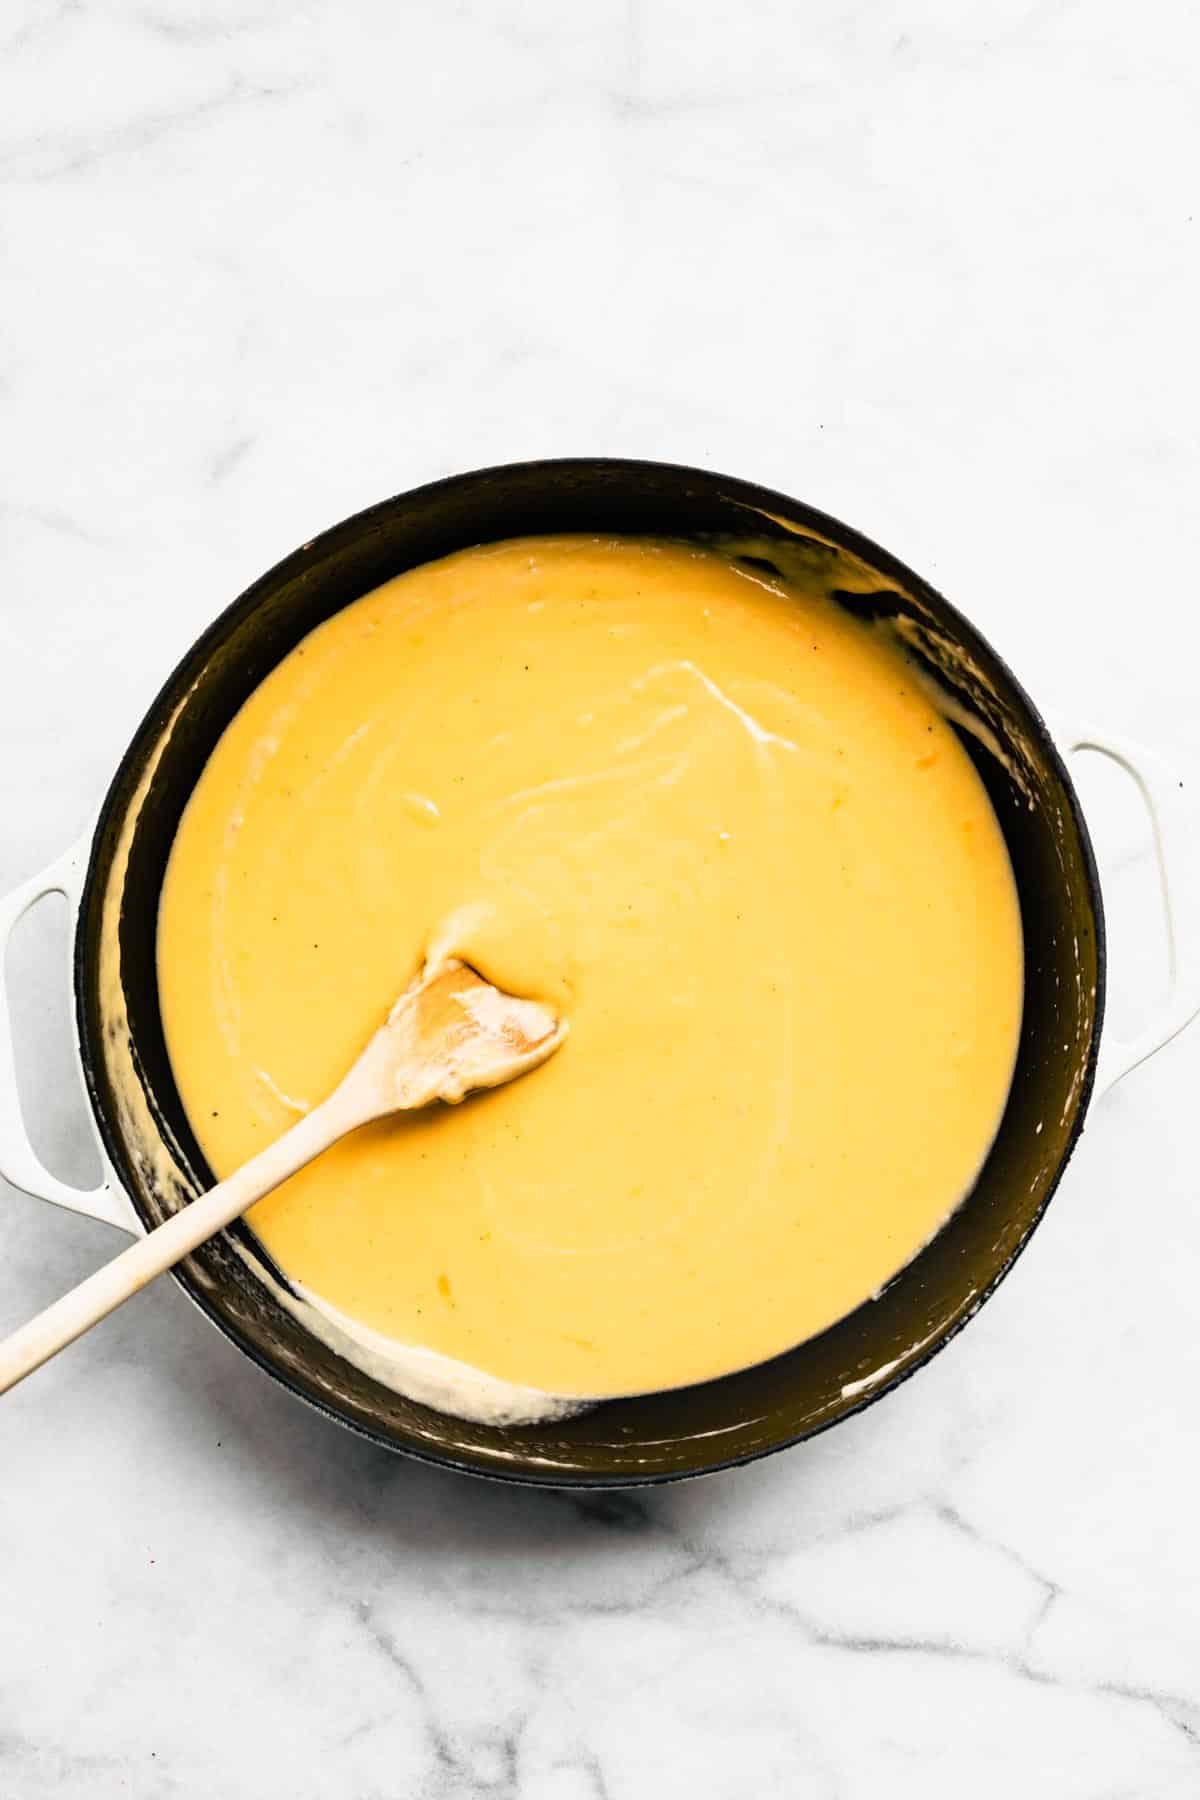 Overhead photo of a wooden spoon in a pan of homemade cheese sauce.